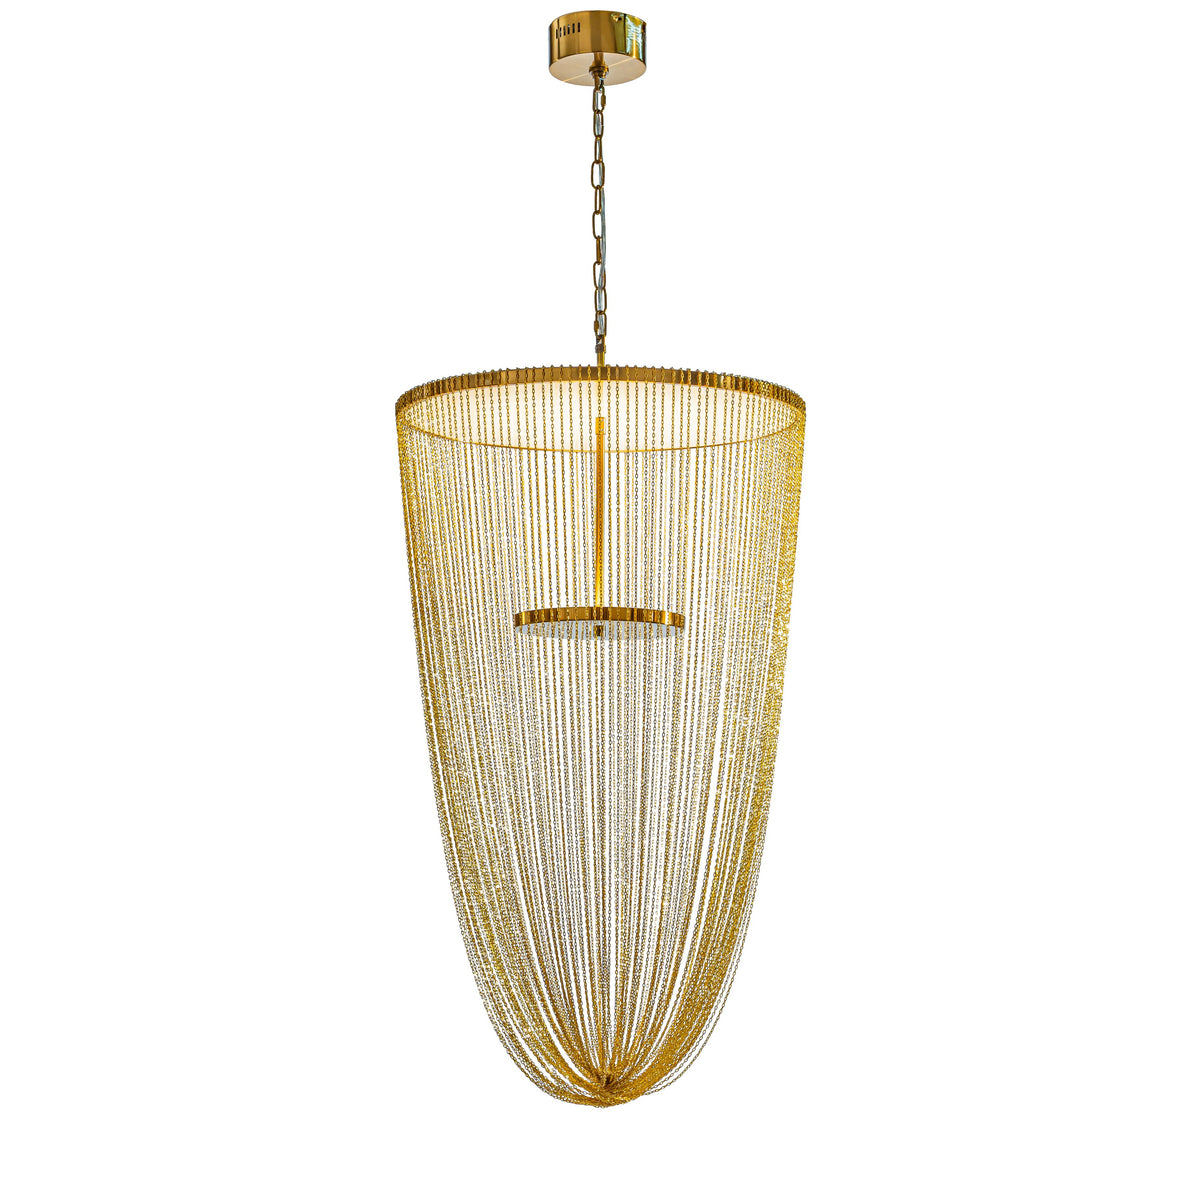 OPEN BOX-Contemporary Antique Gold Fringe LED Chandelier With Metal Chain Accents